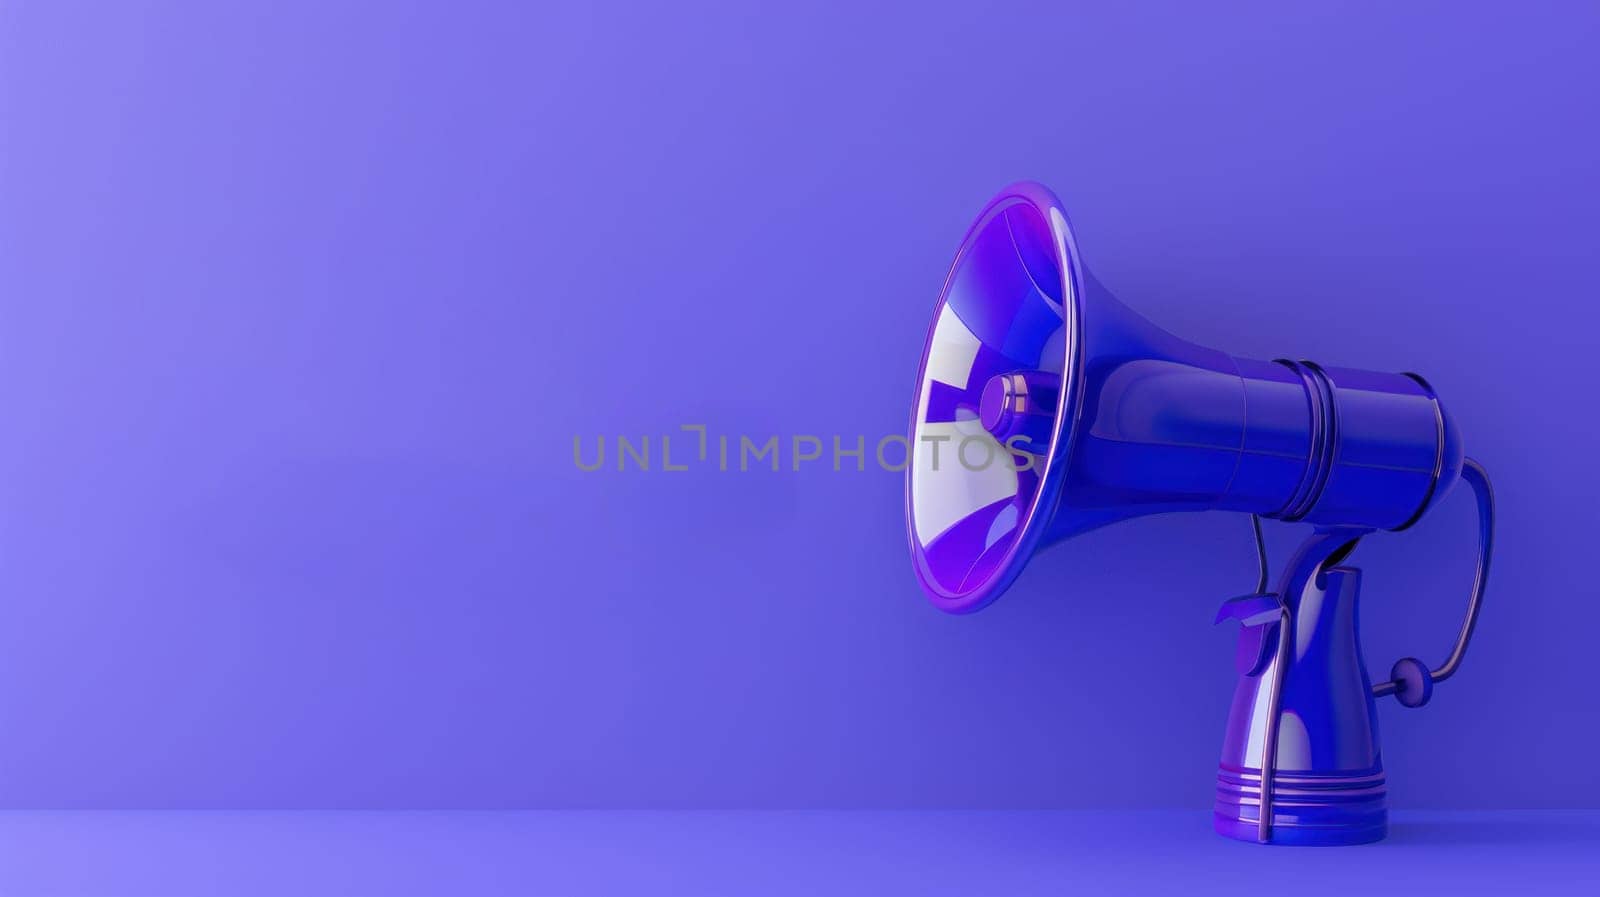 A megaphone is on a bright background.